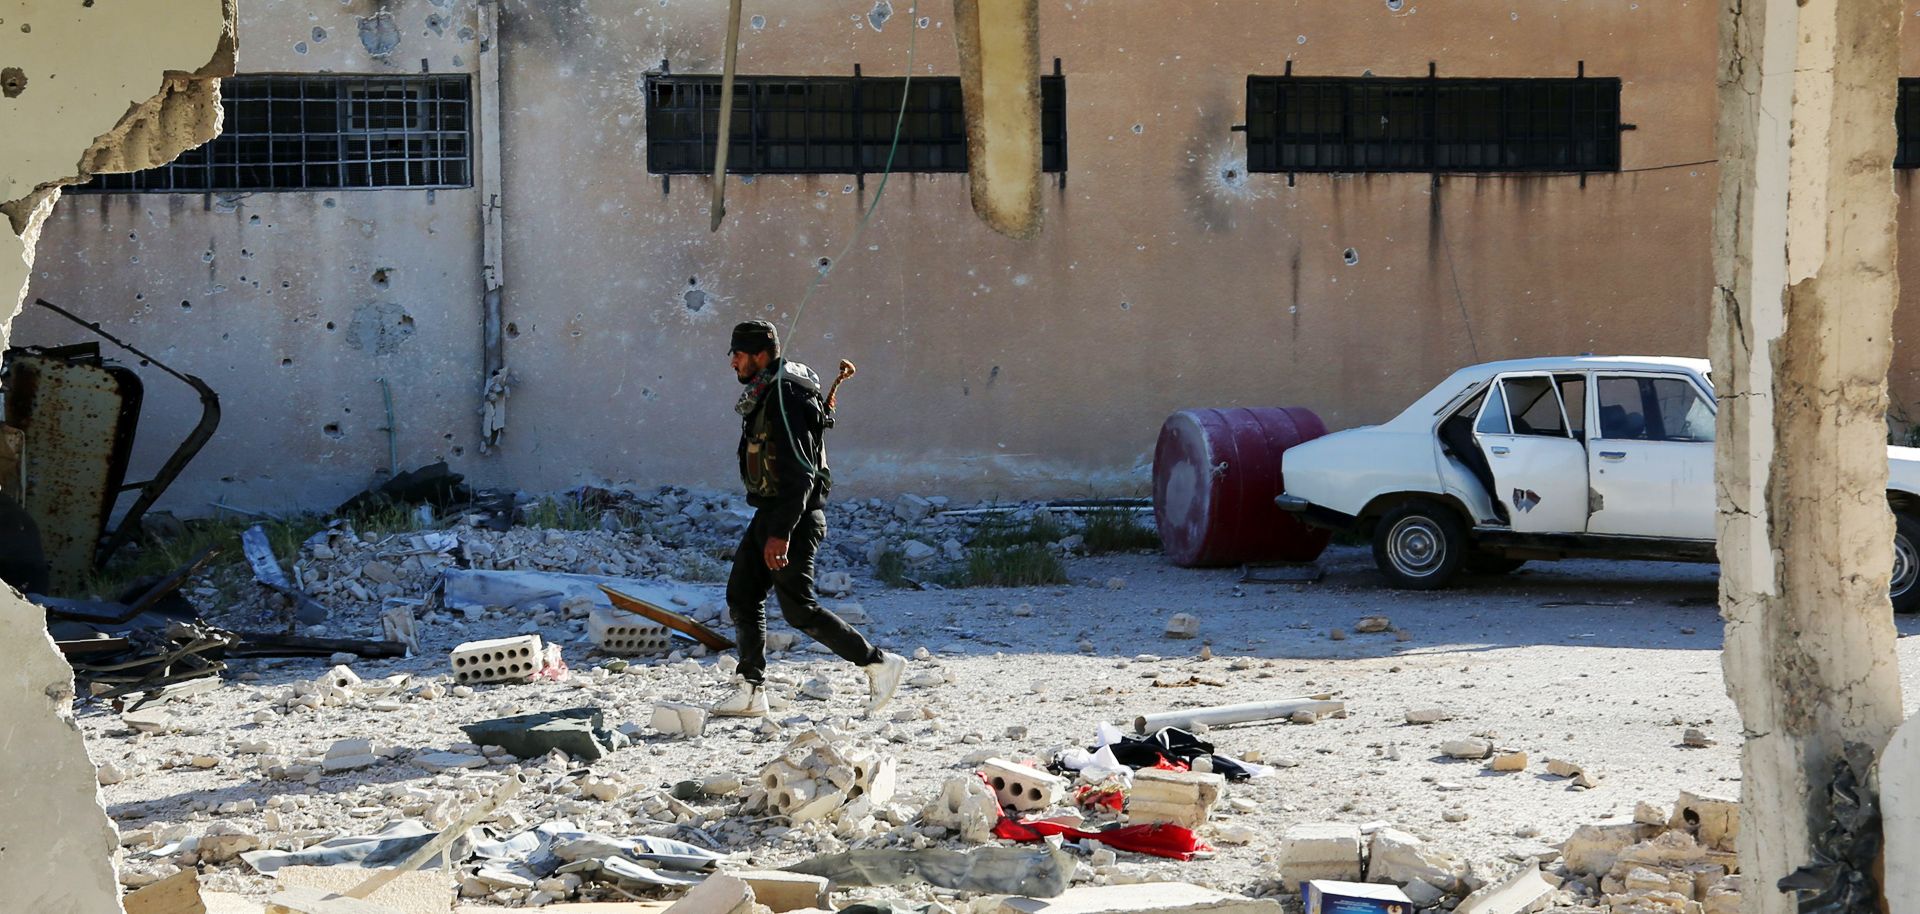 A Kurdish fighter inspects a prison in the northeastern Syrian city of Qamishli on April 22. The Kurds are playing a central role in the Syrian conflict as Russia, the United States and Turkey try to use the minority group to meet their own goals.